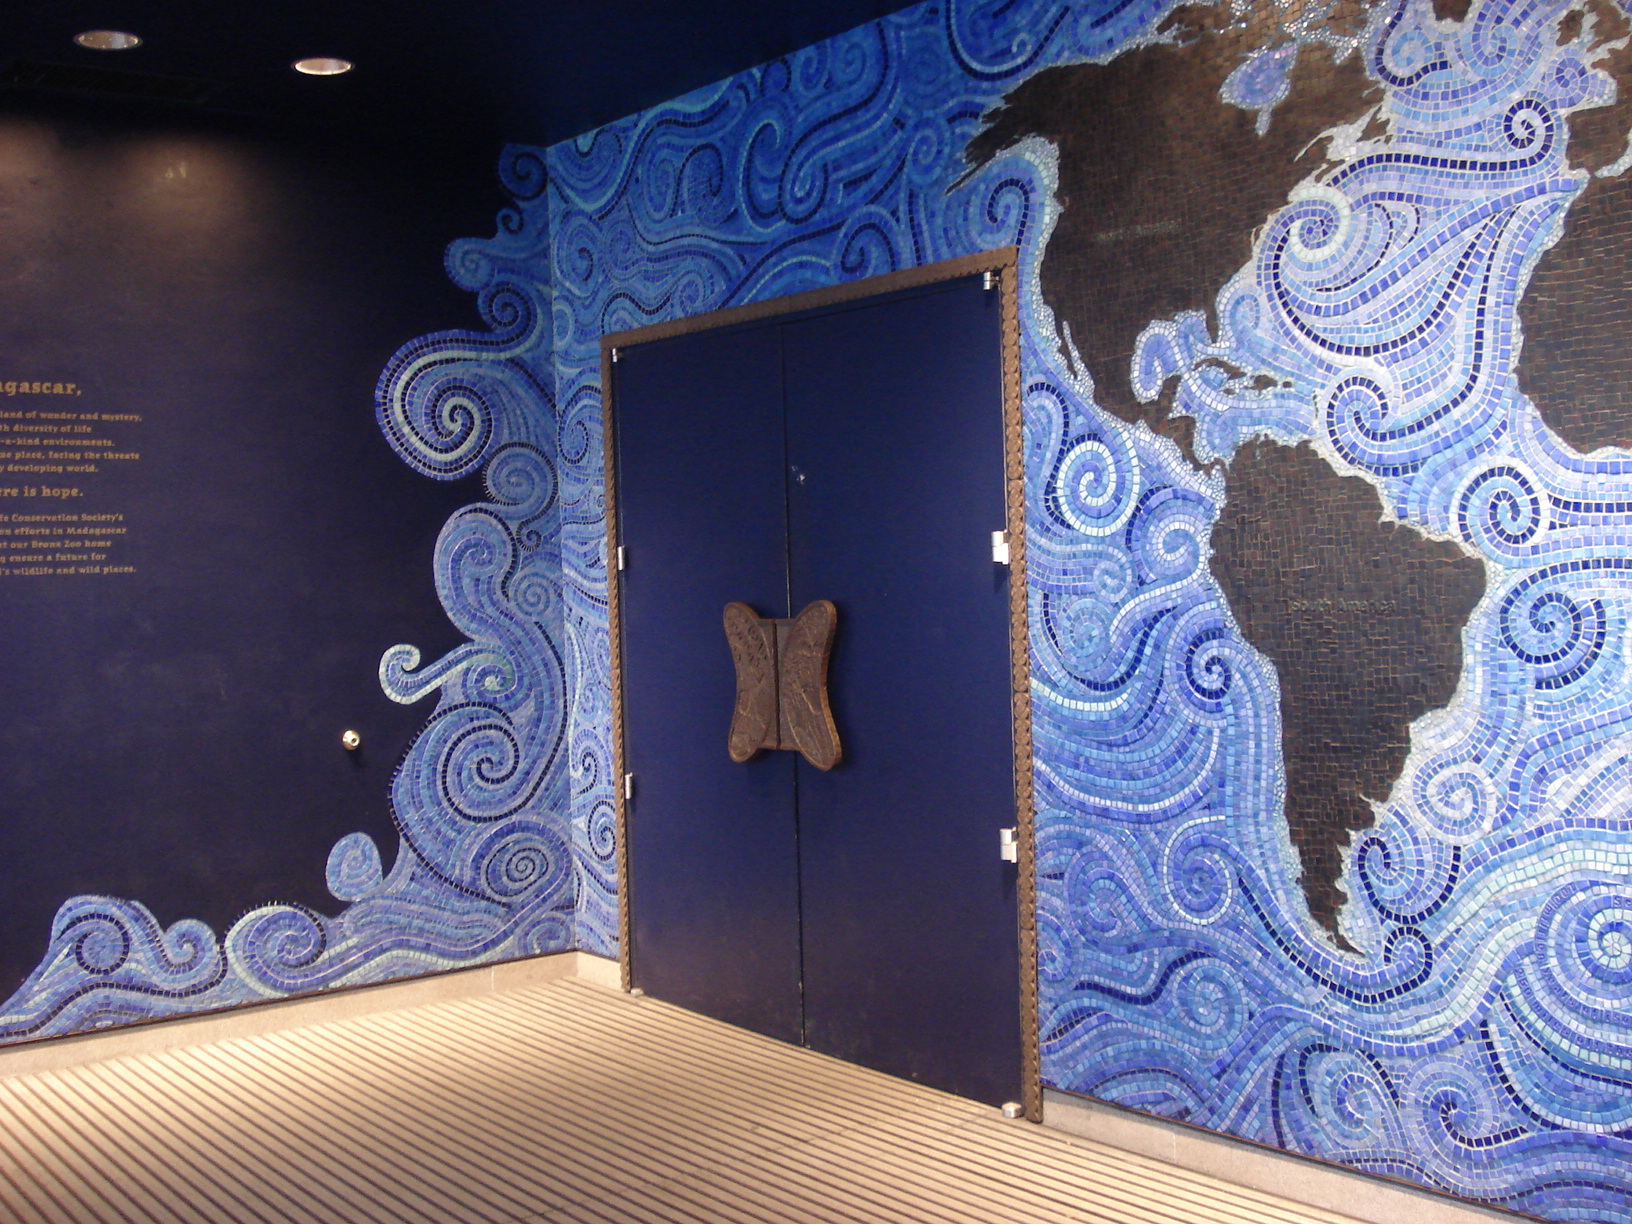 http://www.epoxy.com/images/Epoxy_Tile_Grout_Product225Mdagascar_tile_mural2.jpg